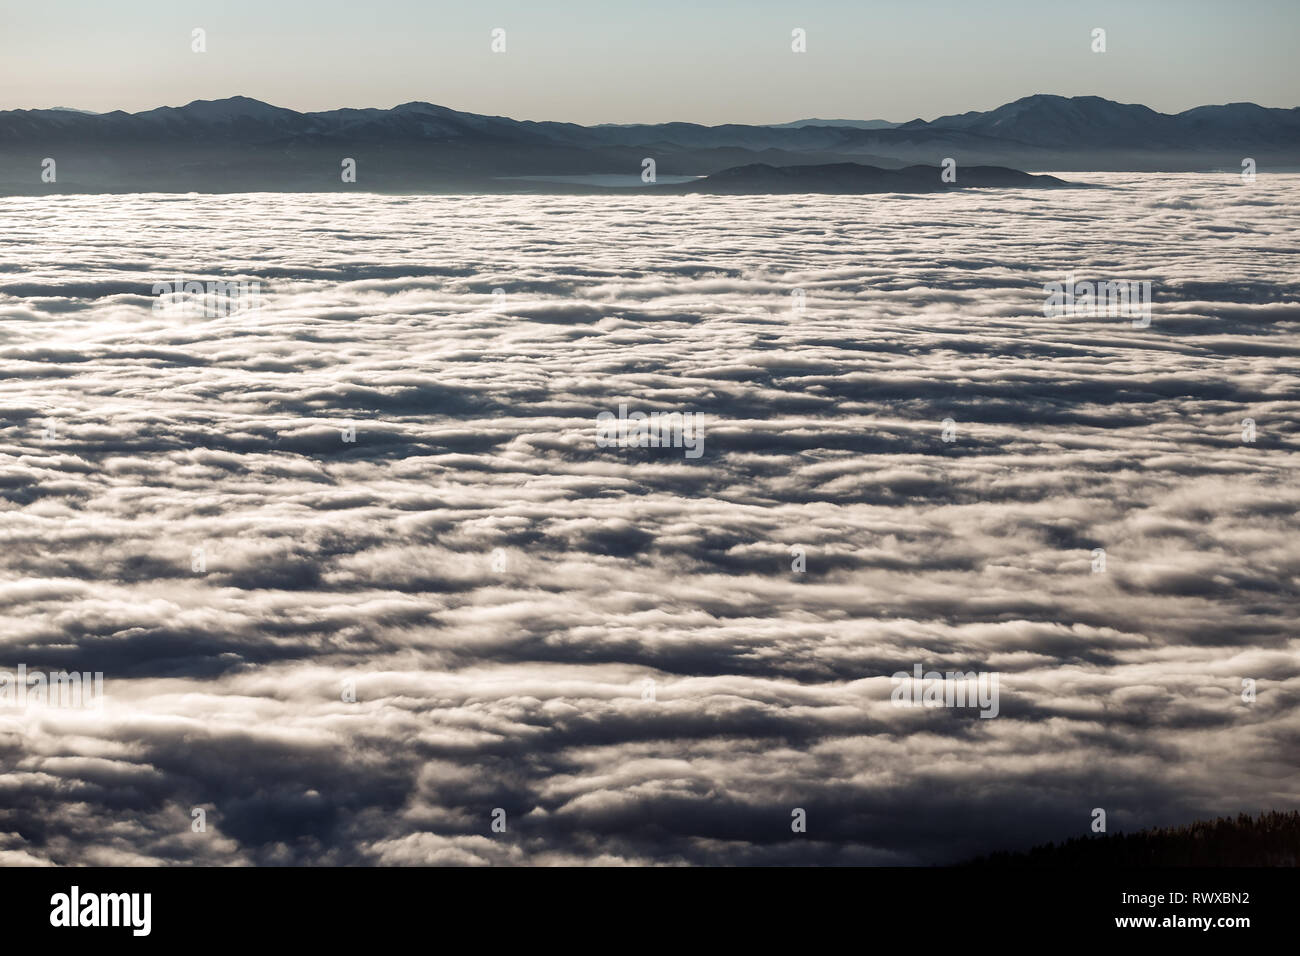 Foggy inversion over Washoe valley in the winter at sunrise Stock Photo